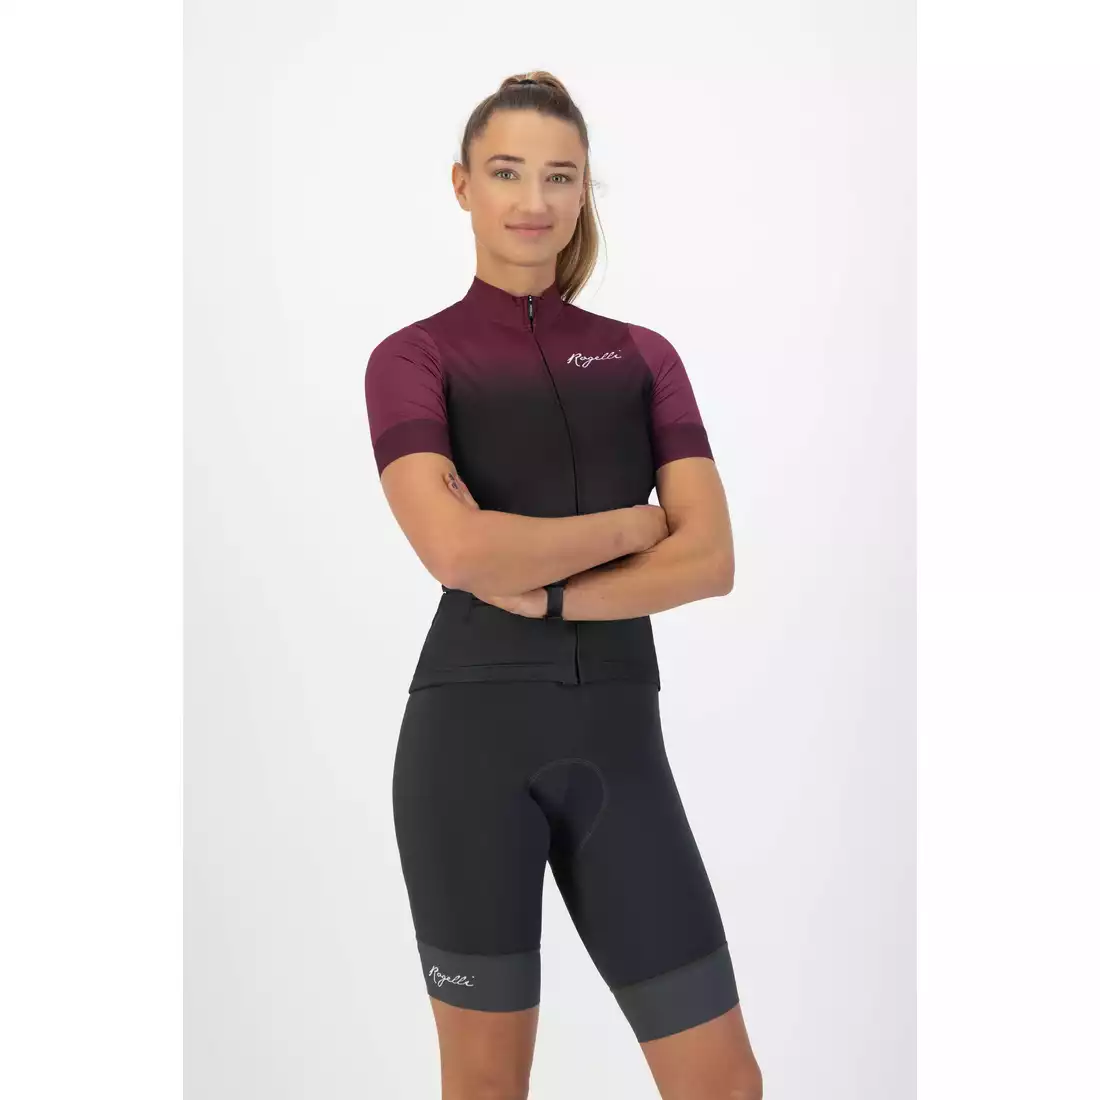 ROGELLI DREAM Women's cycling jersey, gray and maroon